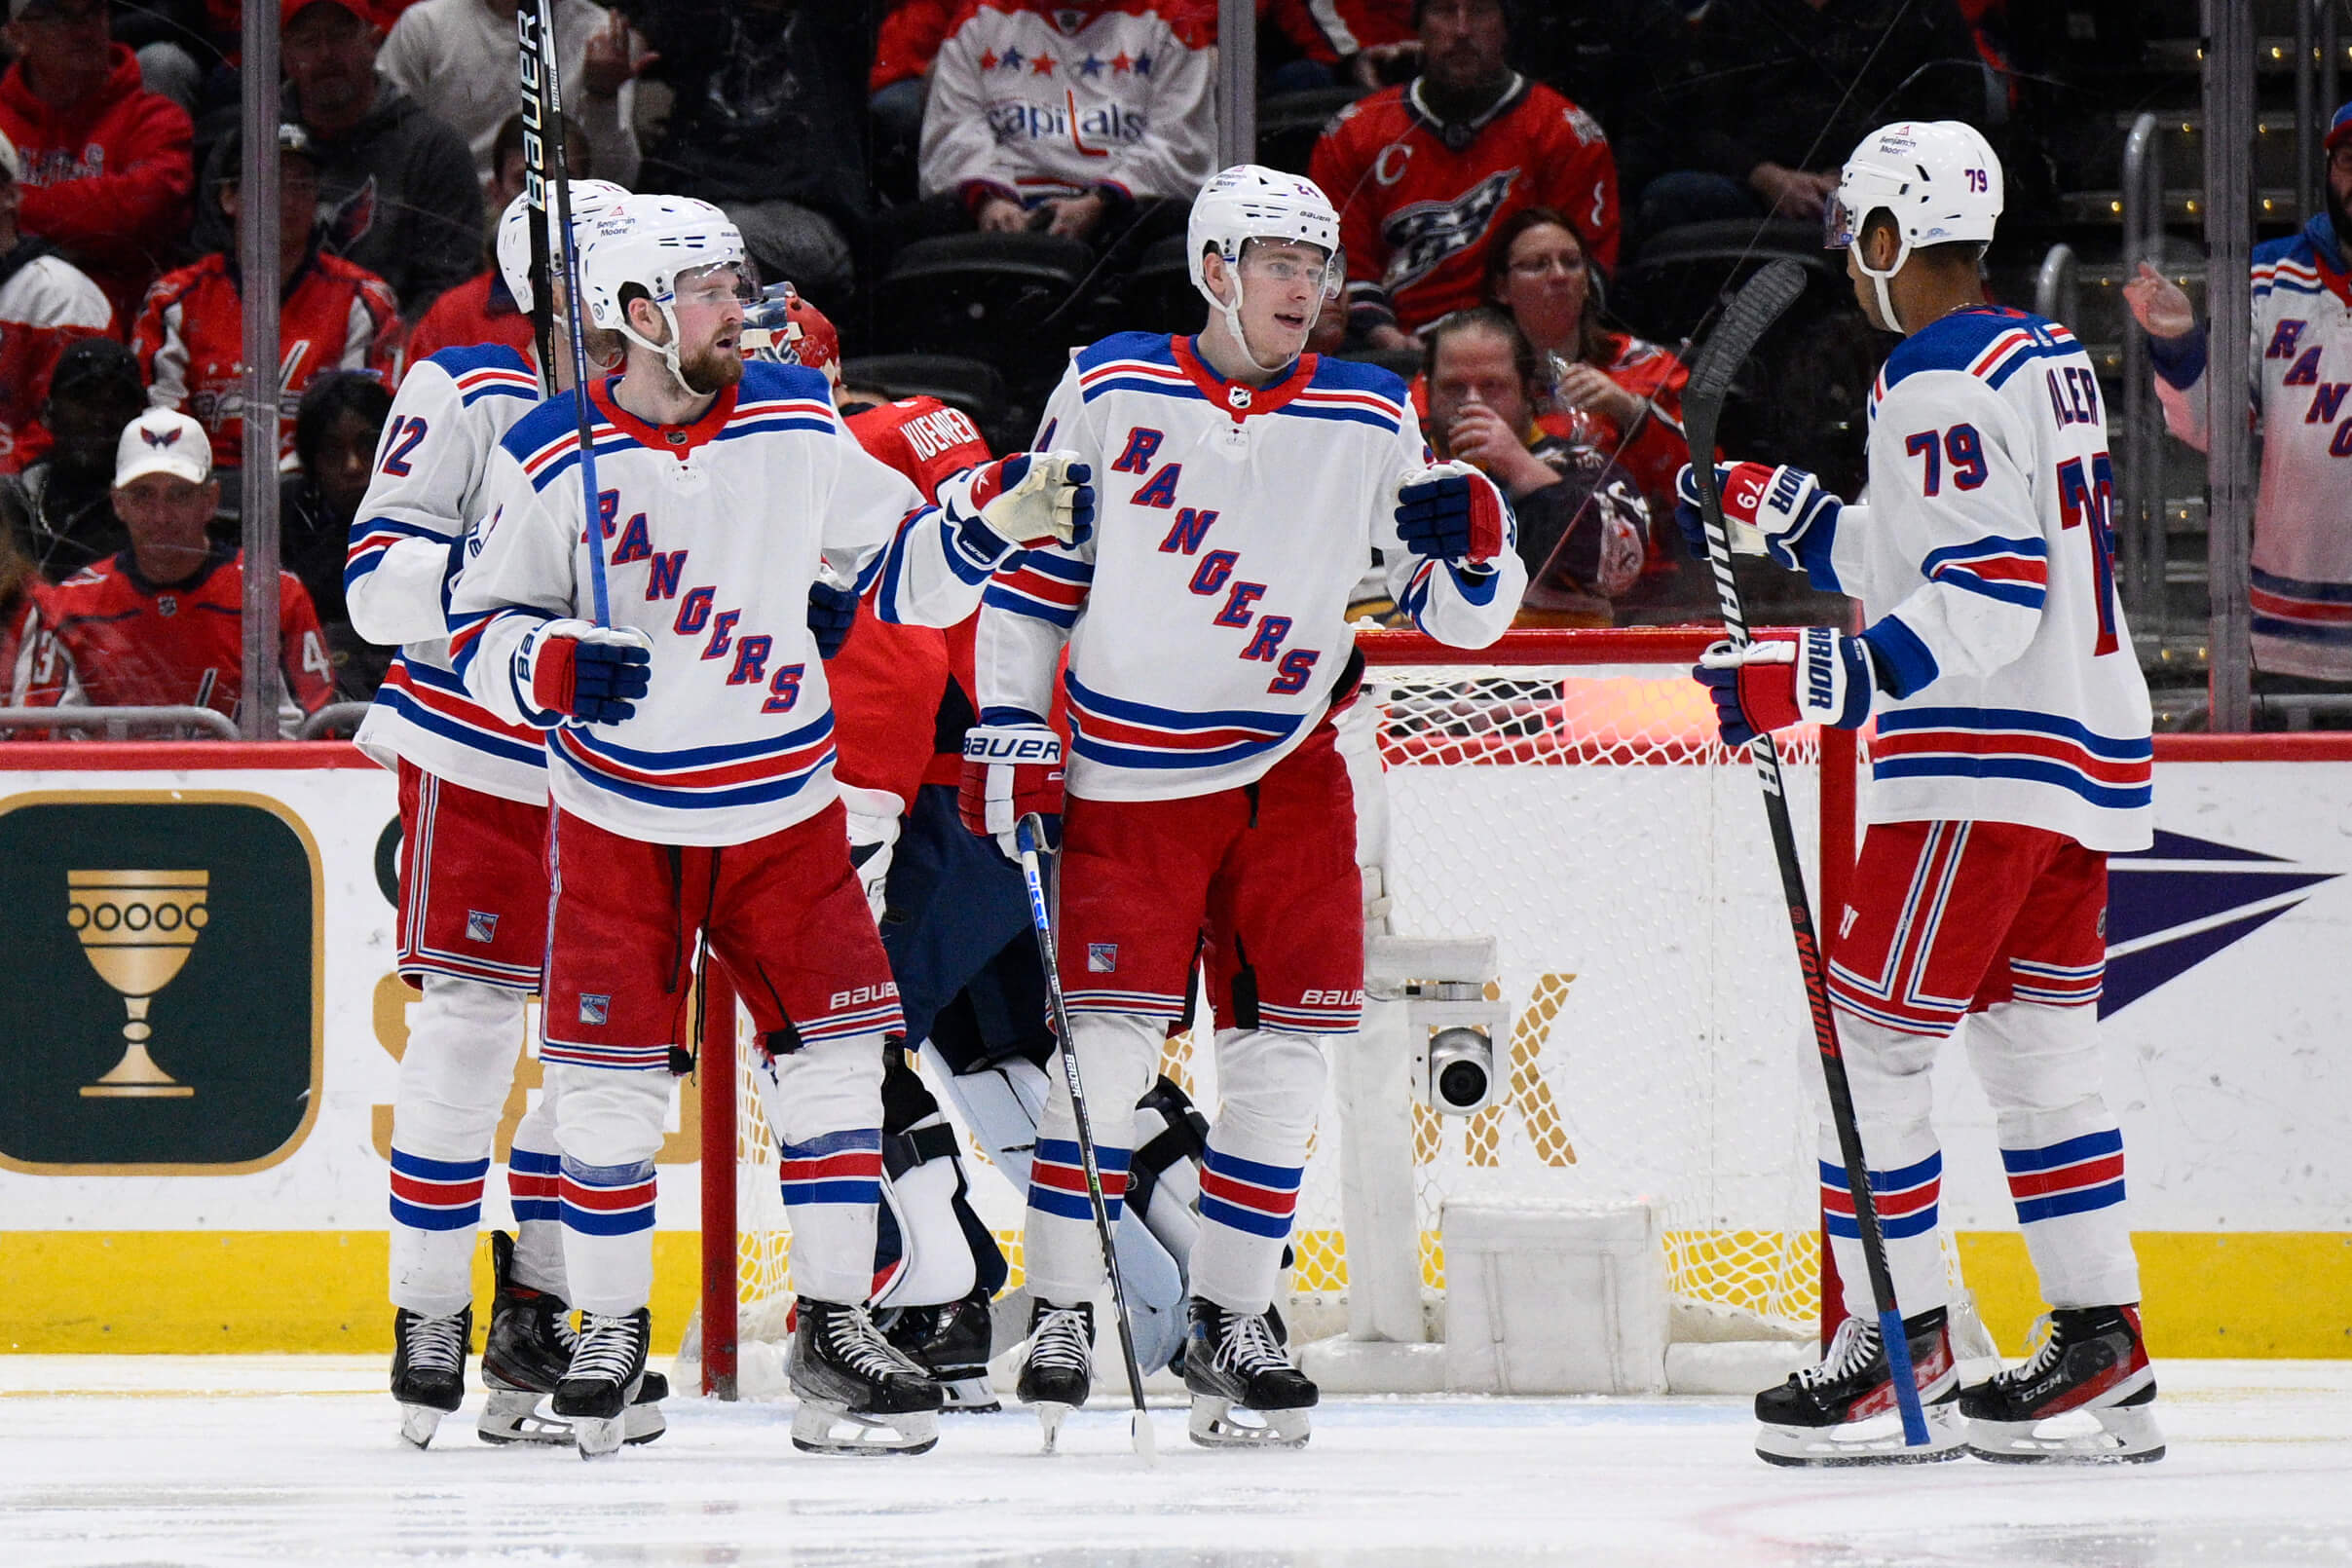 Devils beat Capitals in OT, will face Rangers in 1st round - WTOP News